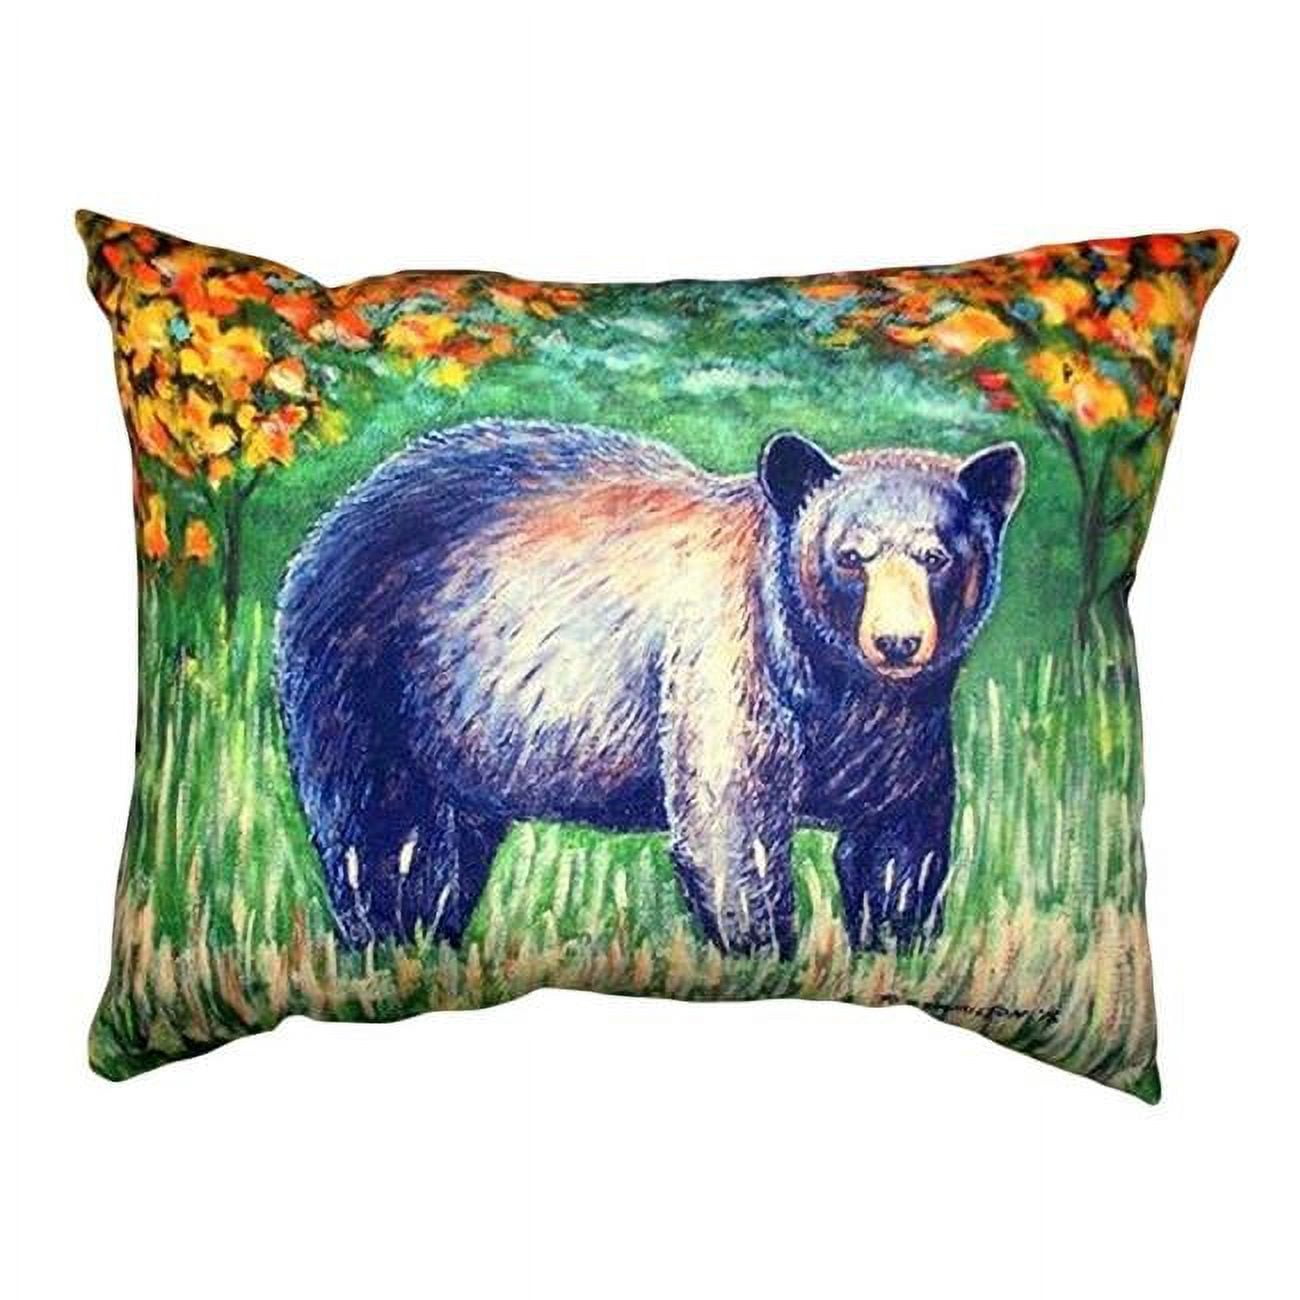 JensenDistributionServices 16 x 20 in. Black Bear No Cord Pillow